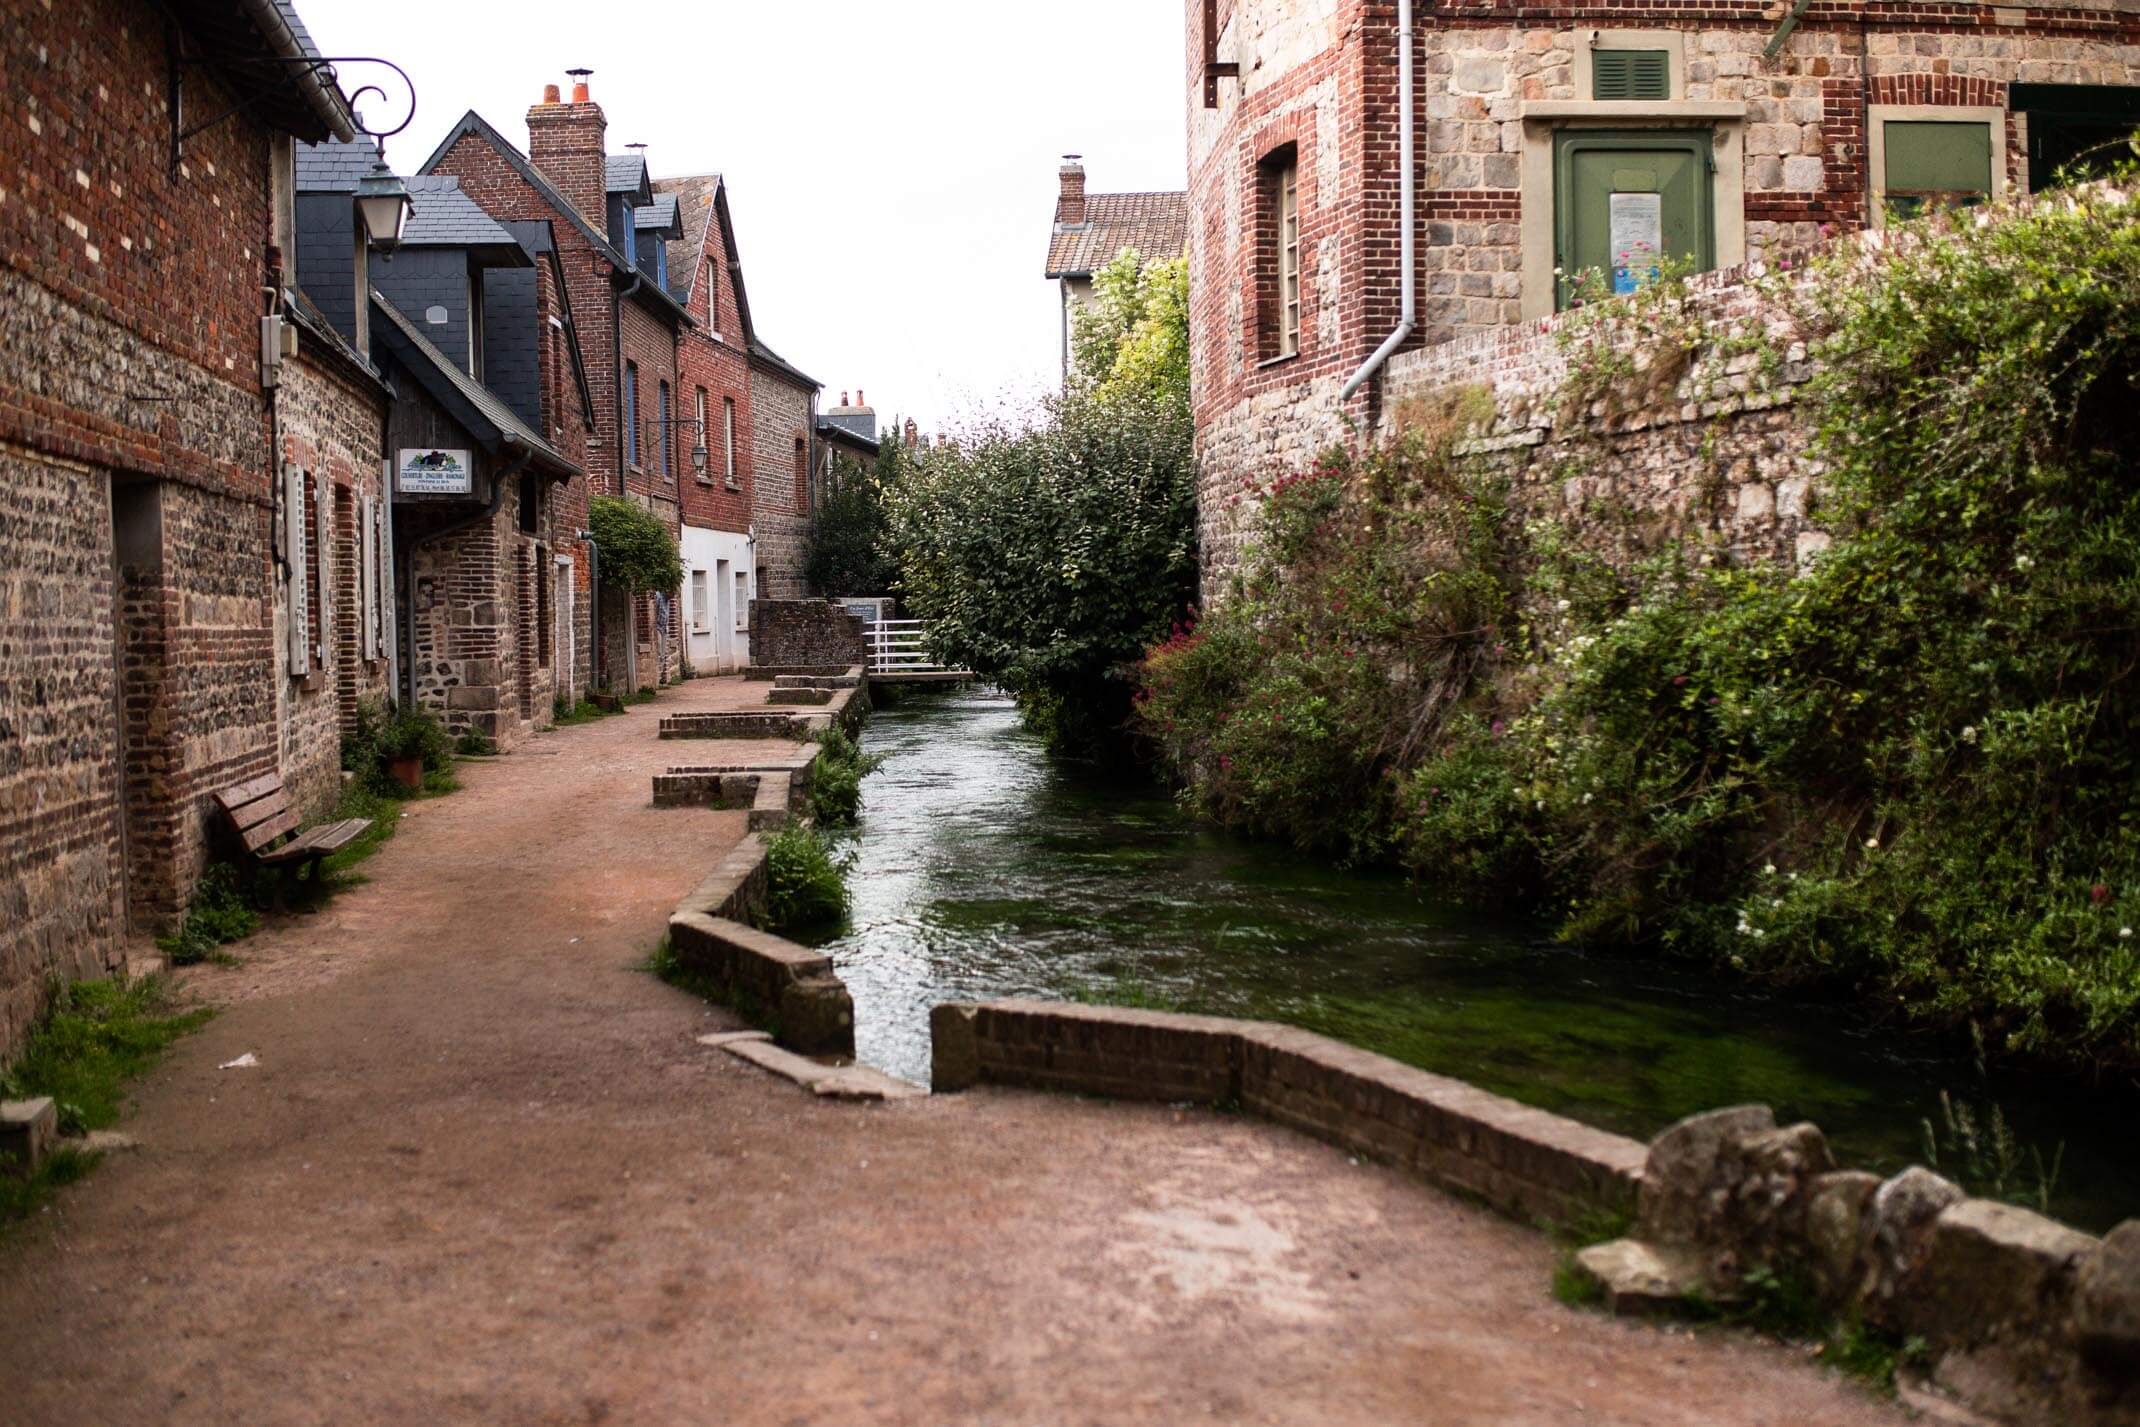 A 4-day northern France road trip